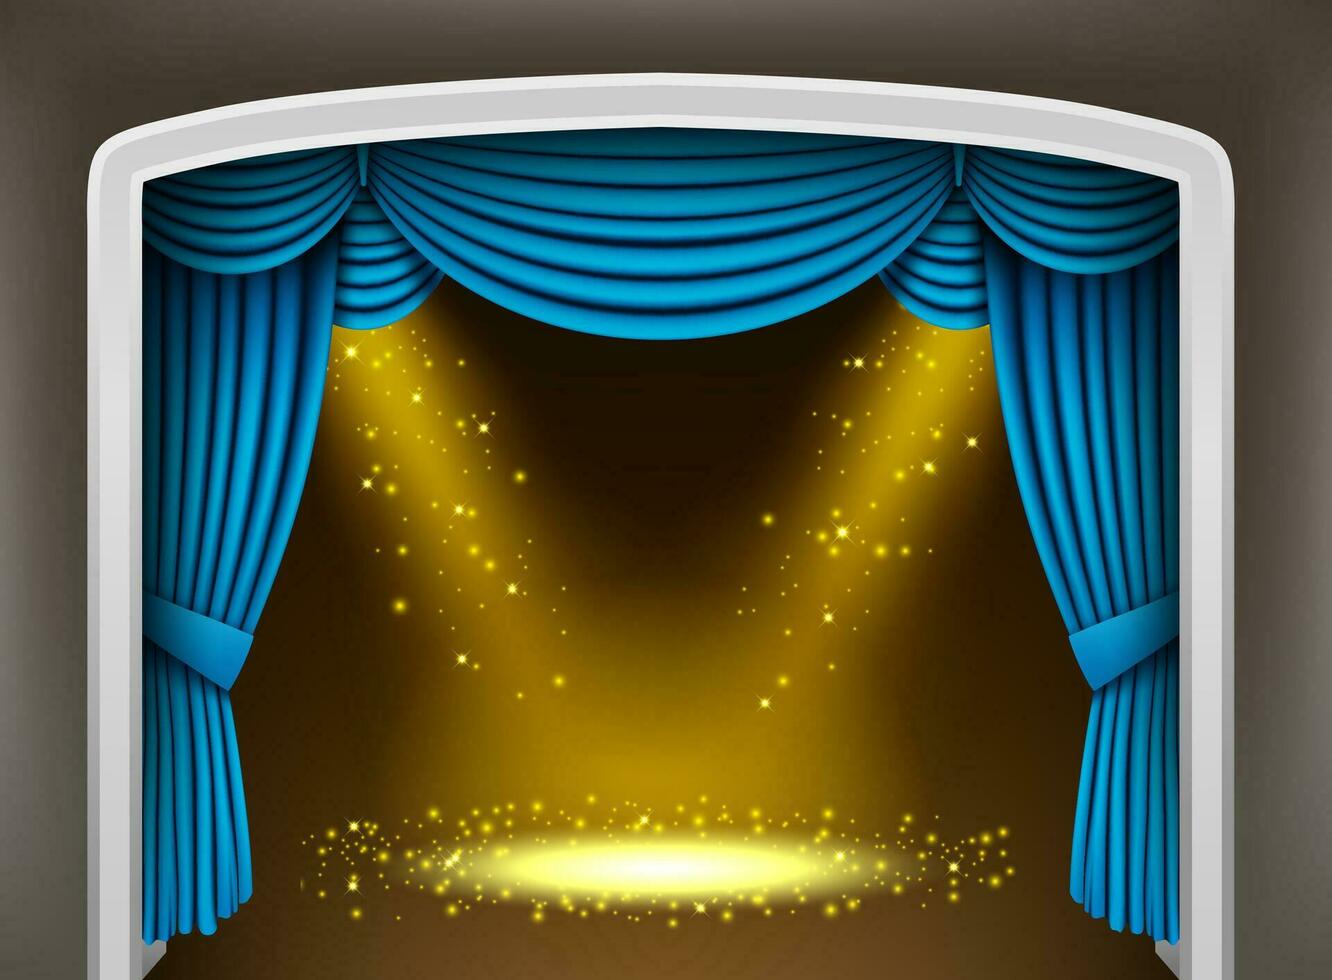 Blue Curtain of Classical Theater with Gold Spotlights and Sparks, Vector Illustration